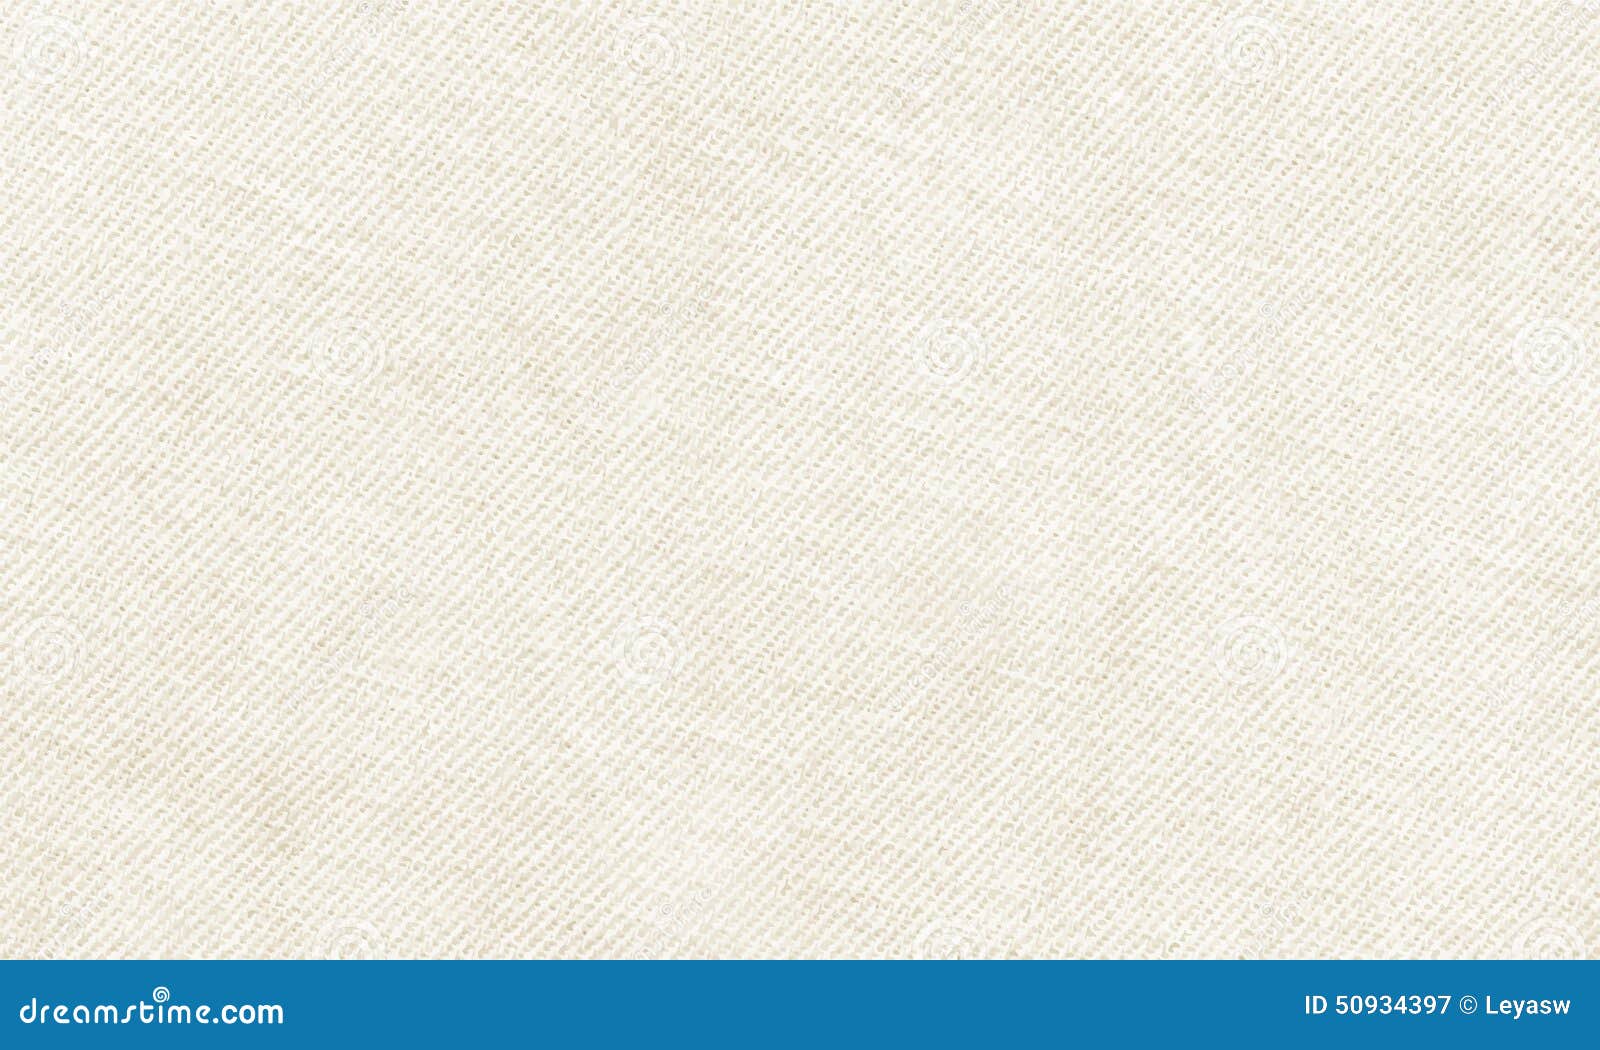 Horizontal White Canvas Material To Use As Background or Texture Stock  Vector - Illustration of blank, clean: 50934397